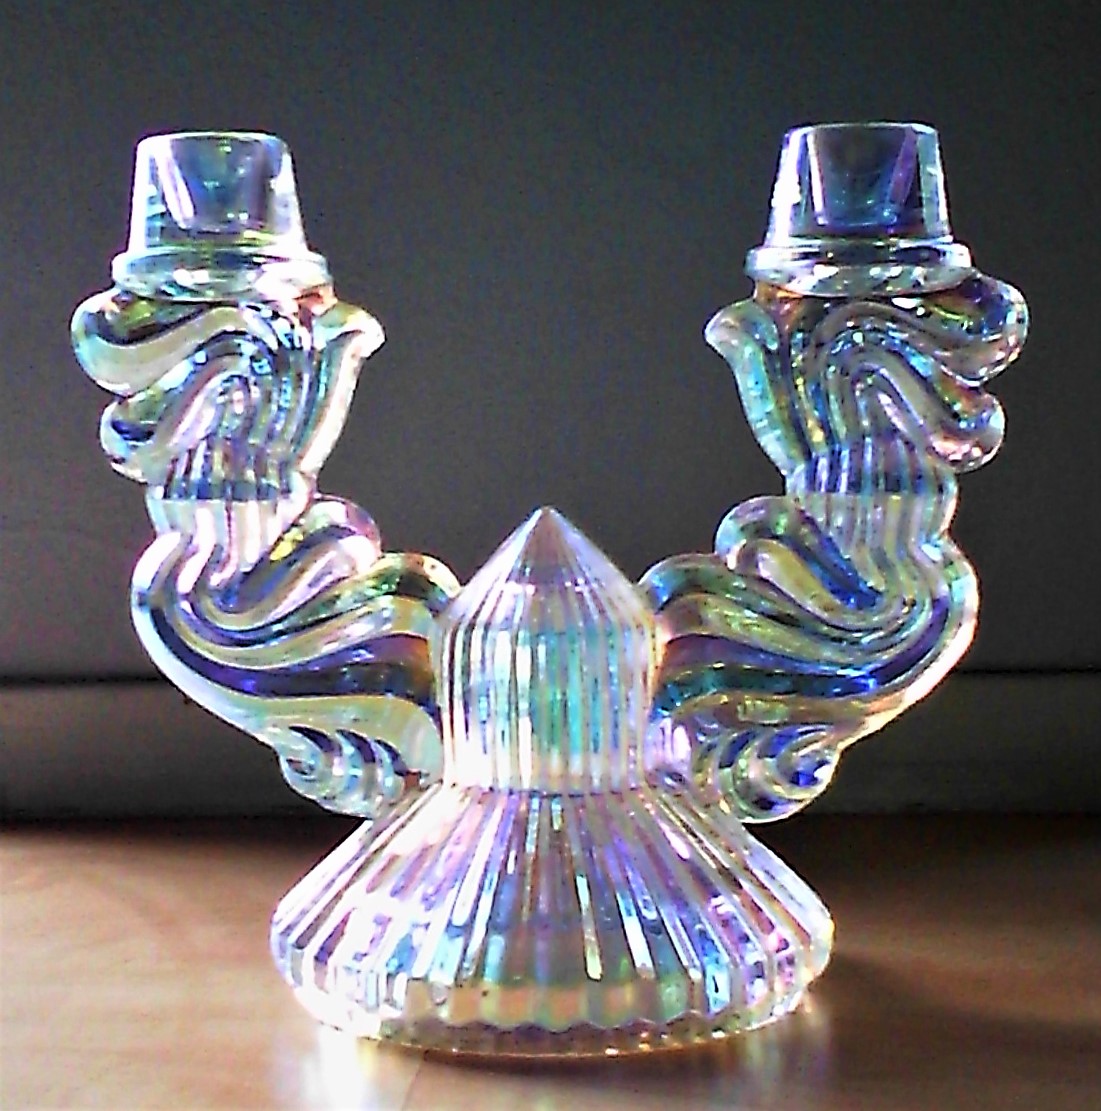 Candlestick with iridescent glass finish